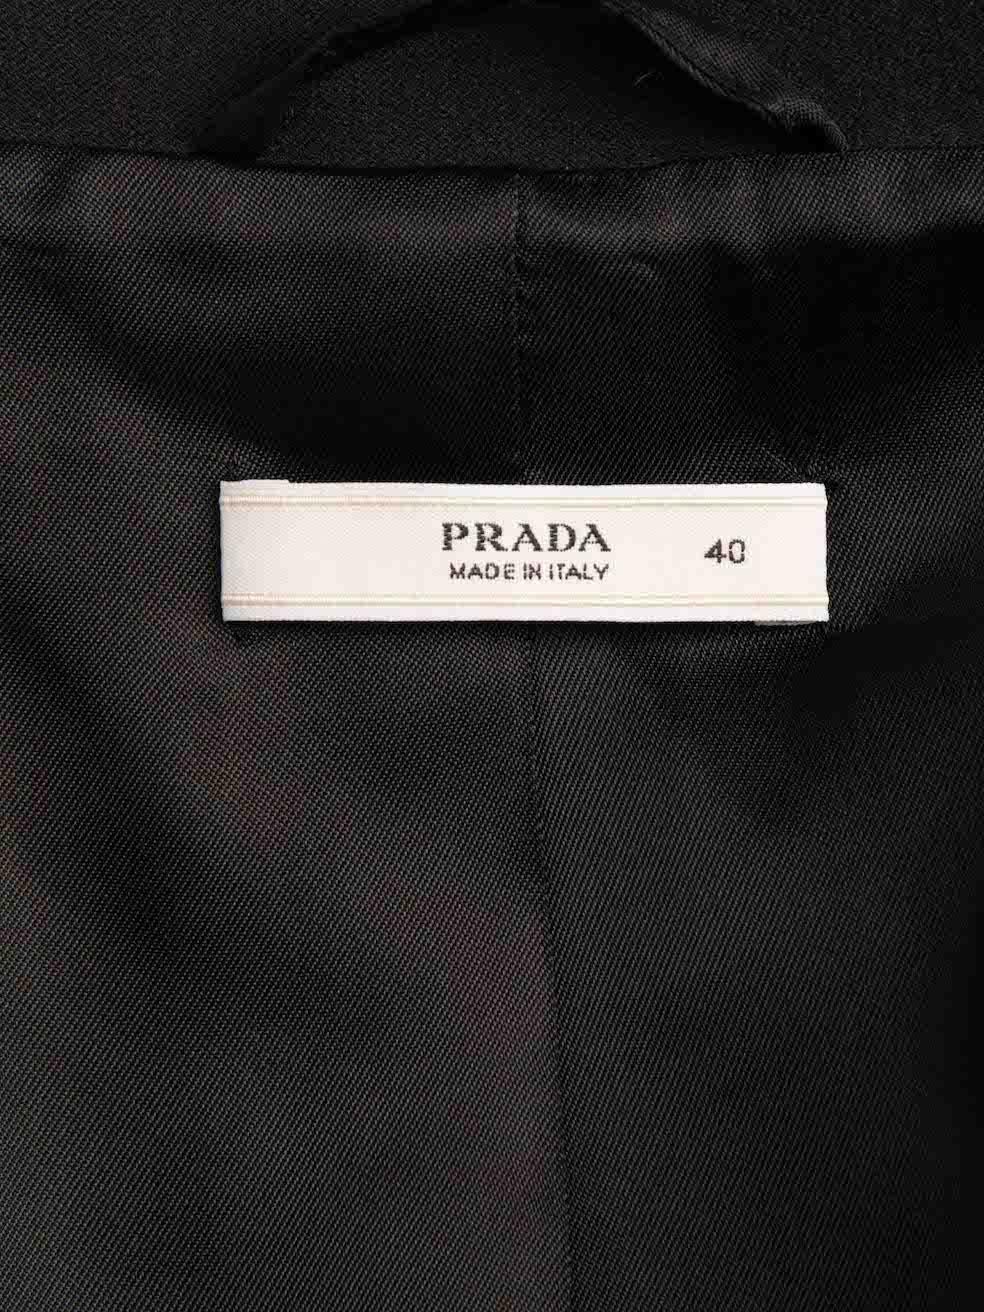 Prada Women's Black Belted Evening Fitted Jacket 2